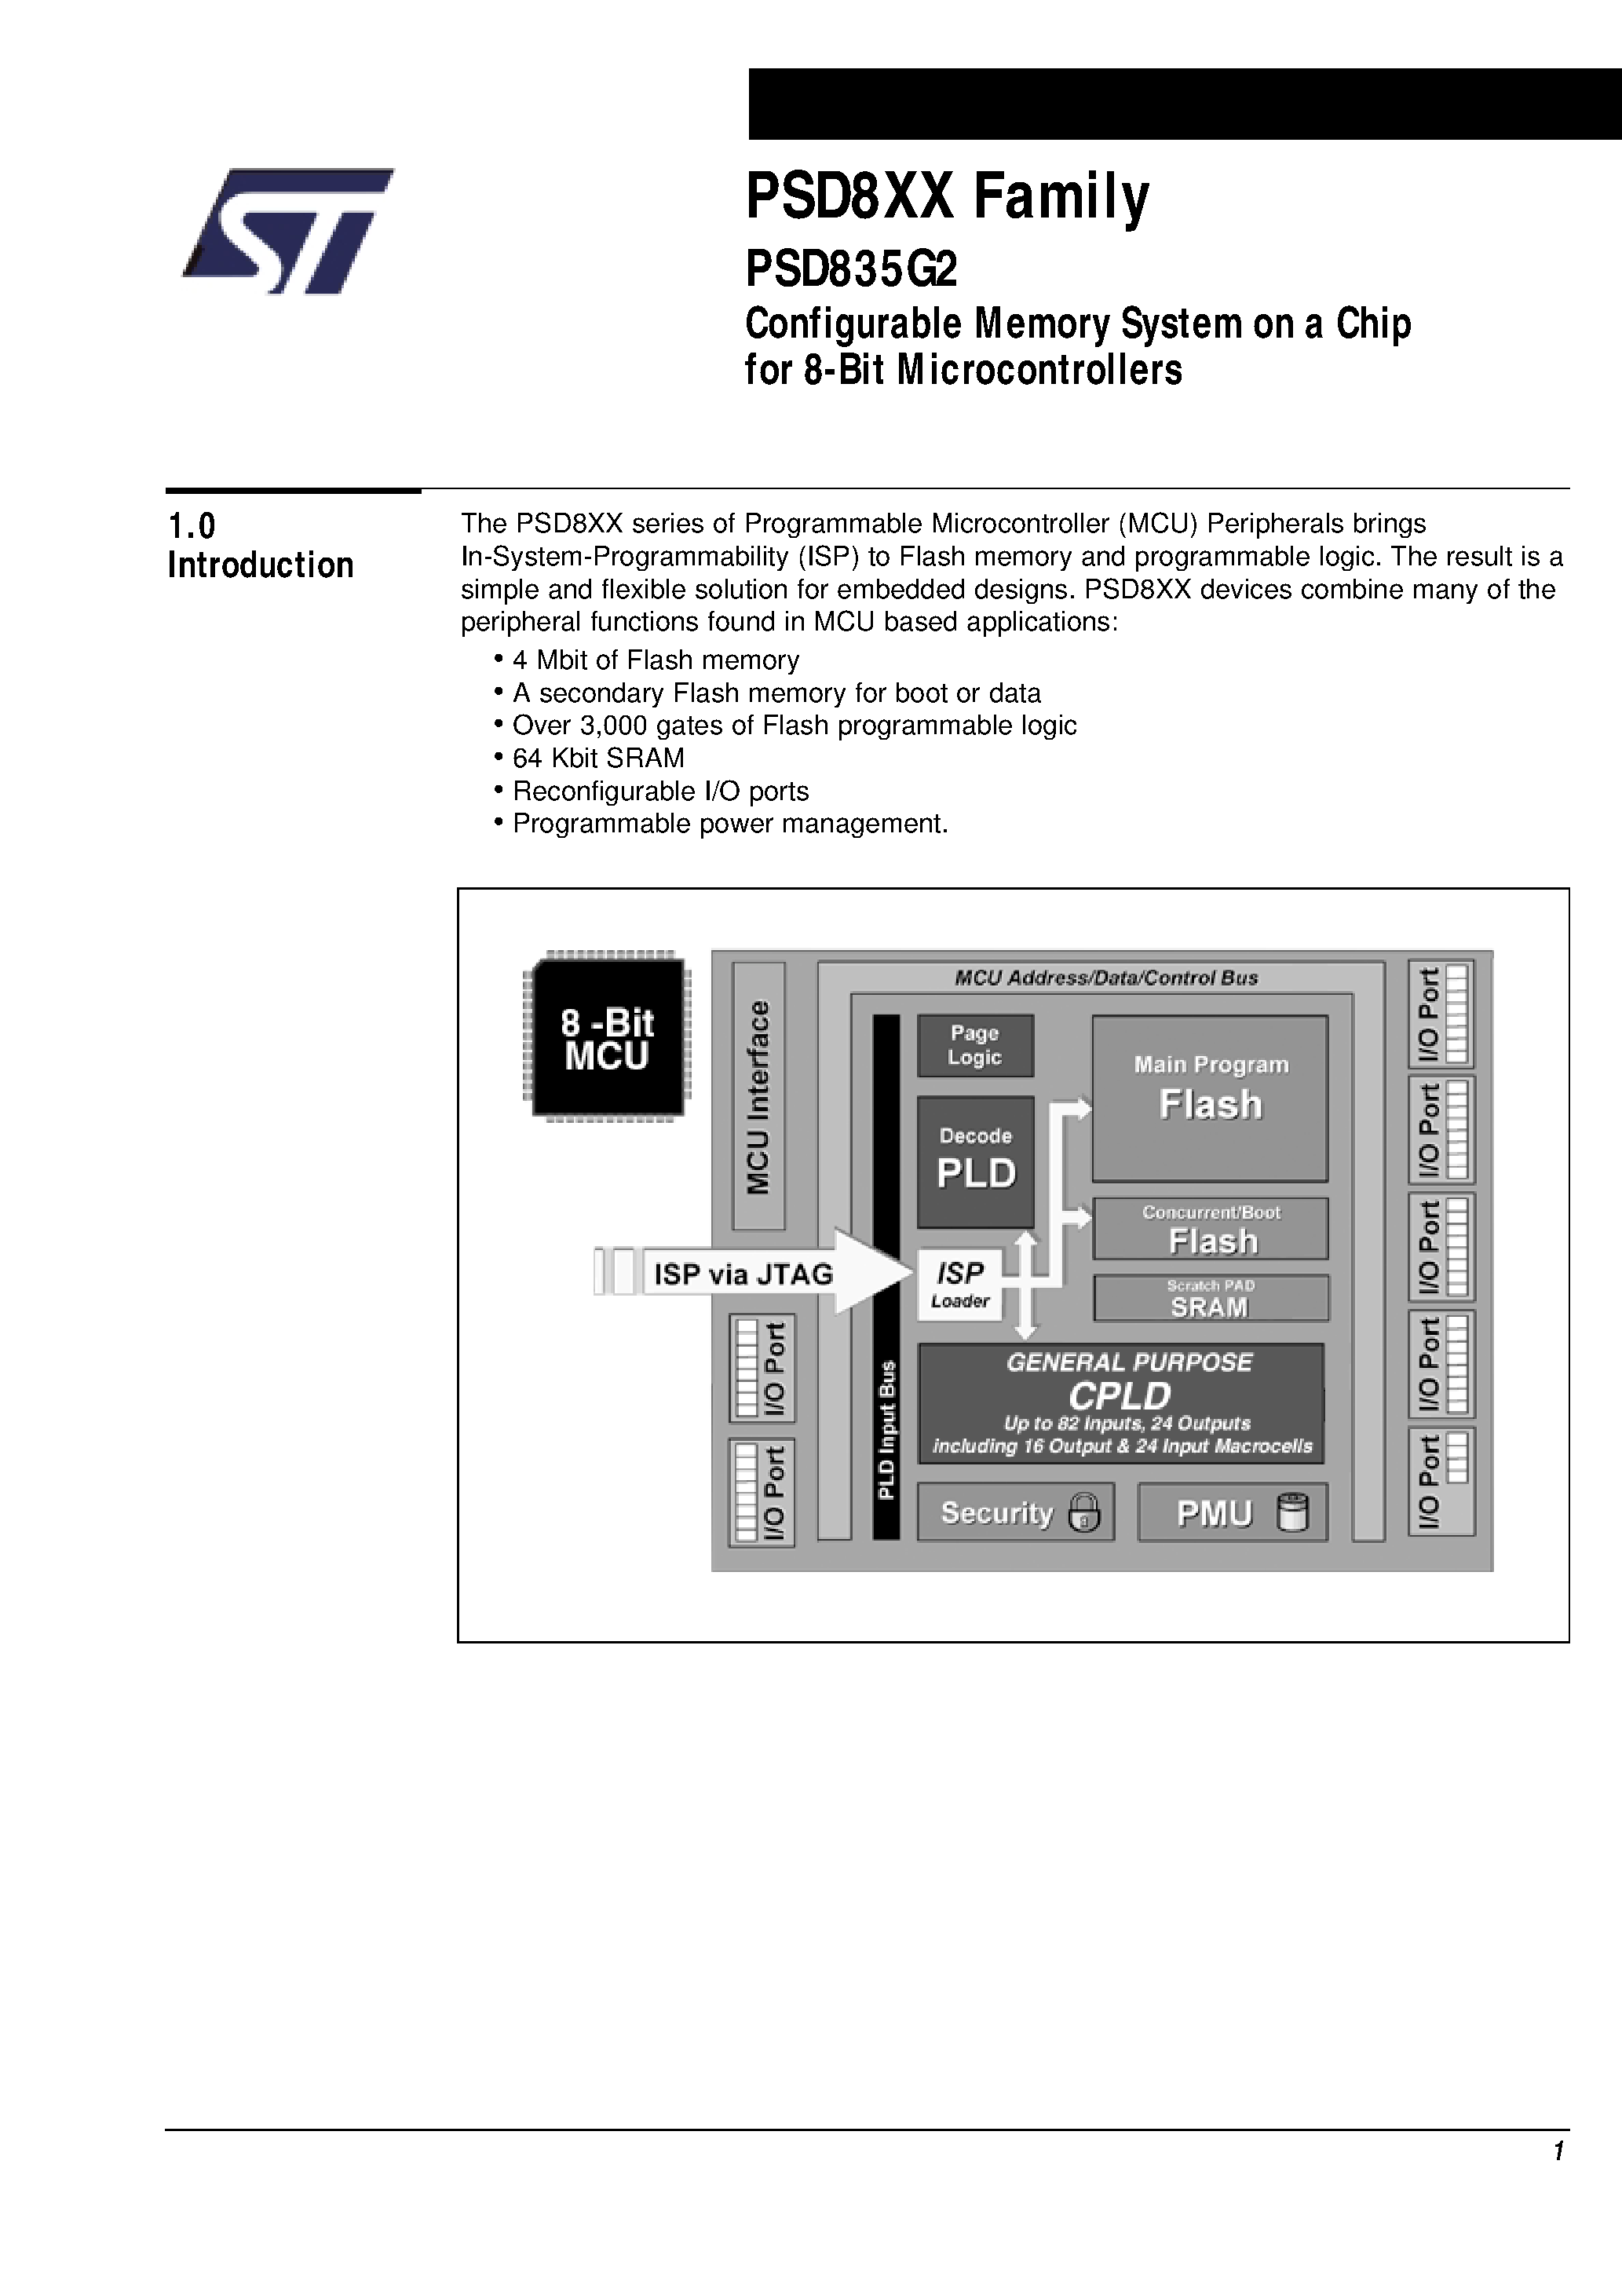 Datasheet PSD835F1-A-12UI - Configurable Memory System on a Chip for 8-Bit Microcontrollers page 2